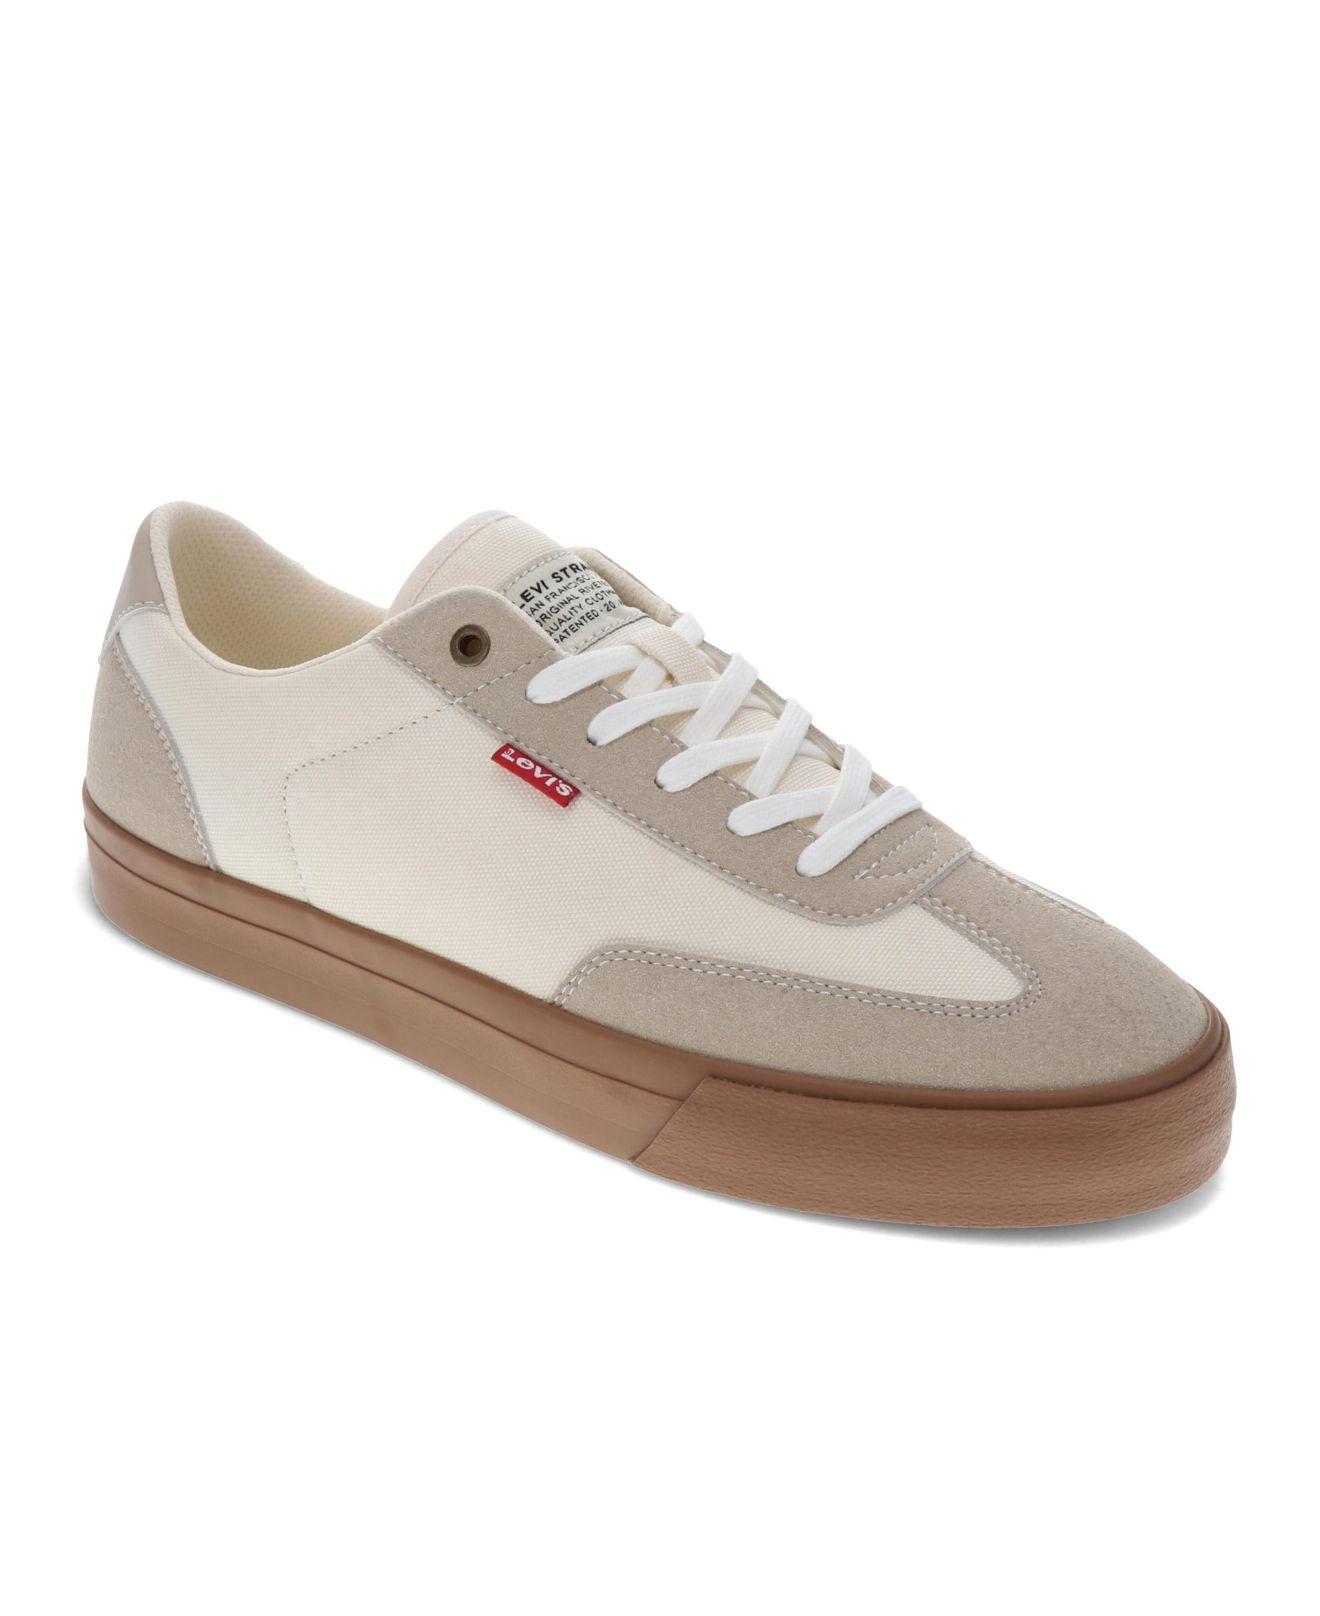 Levis Trainers - Courtright - 232805-981-151 - Online shop for sneakers,  shoes and boots